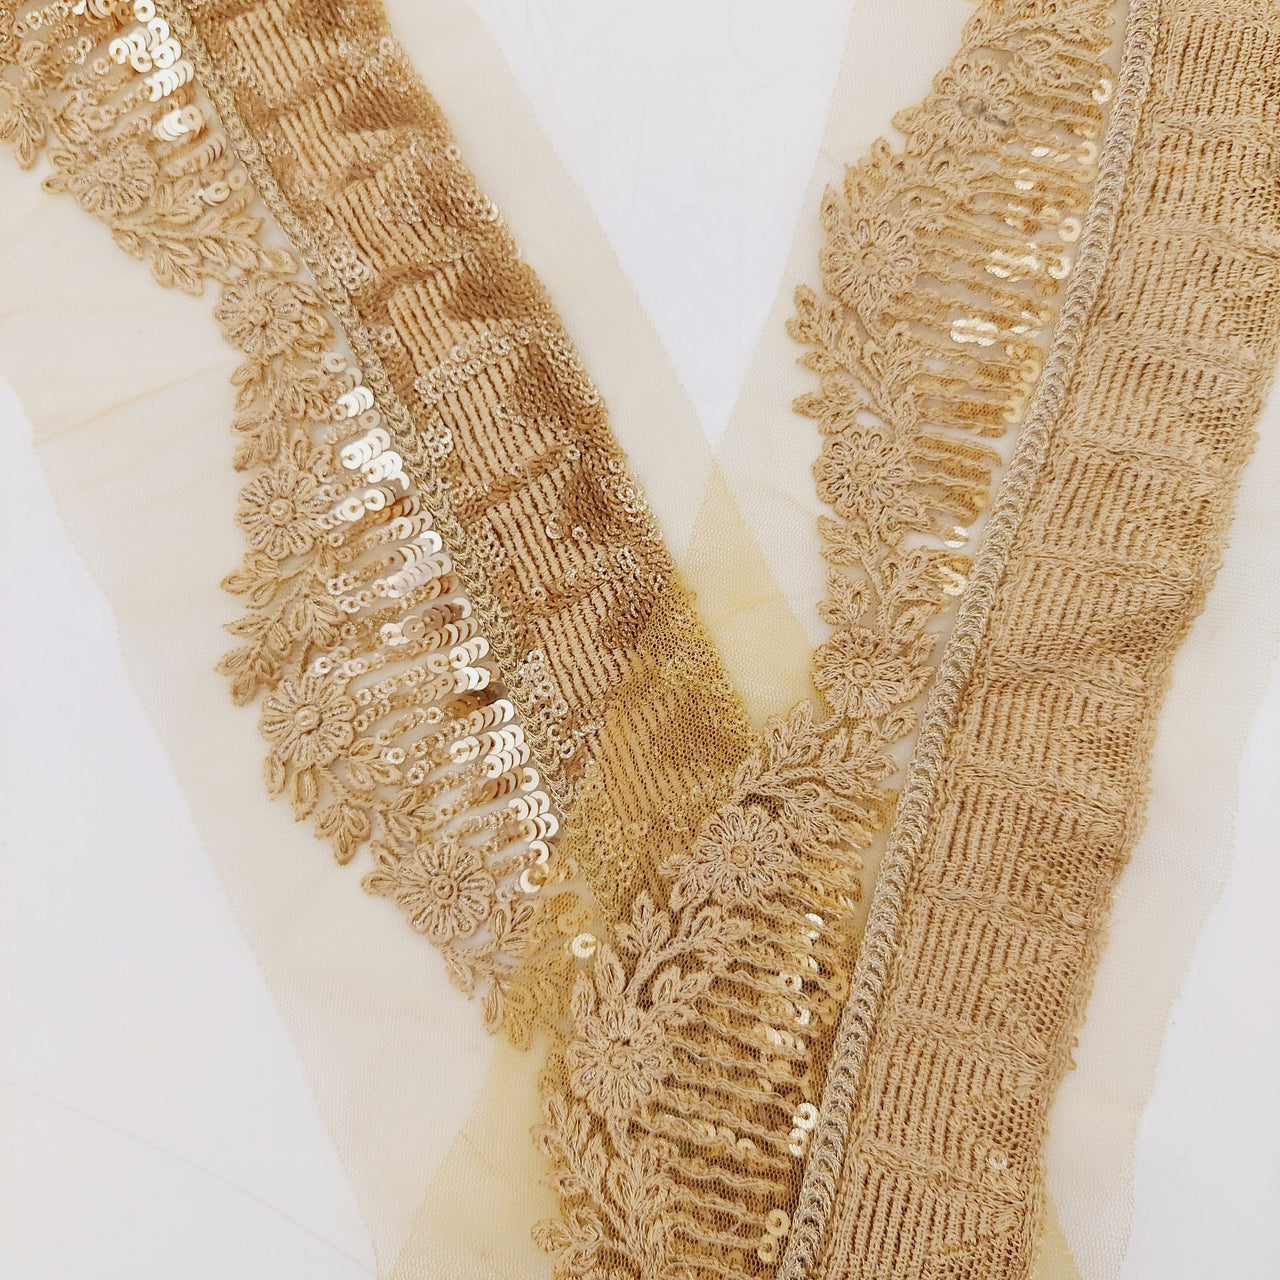 Gold Net Lace Trim with Floral Embroidery and Sequins, Sari Border, Embroidered Trim